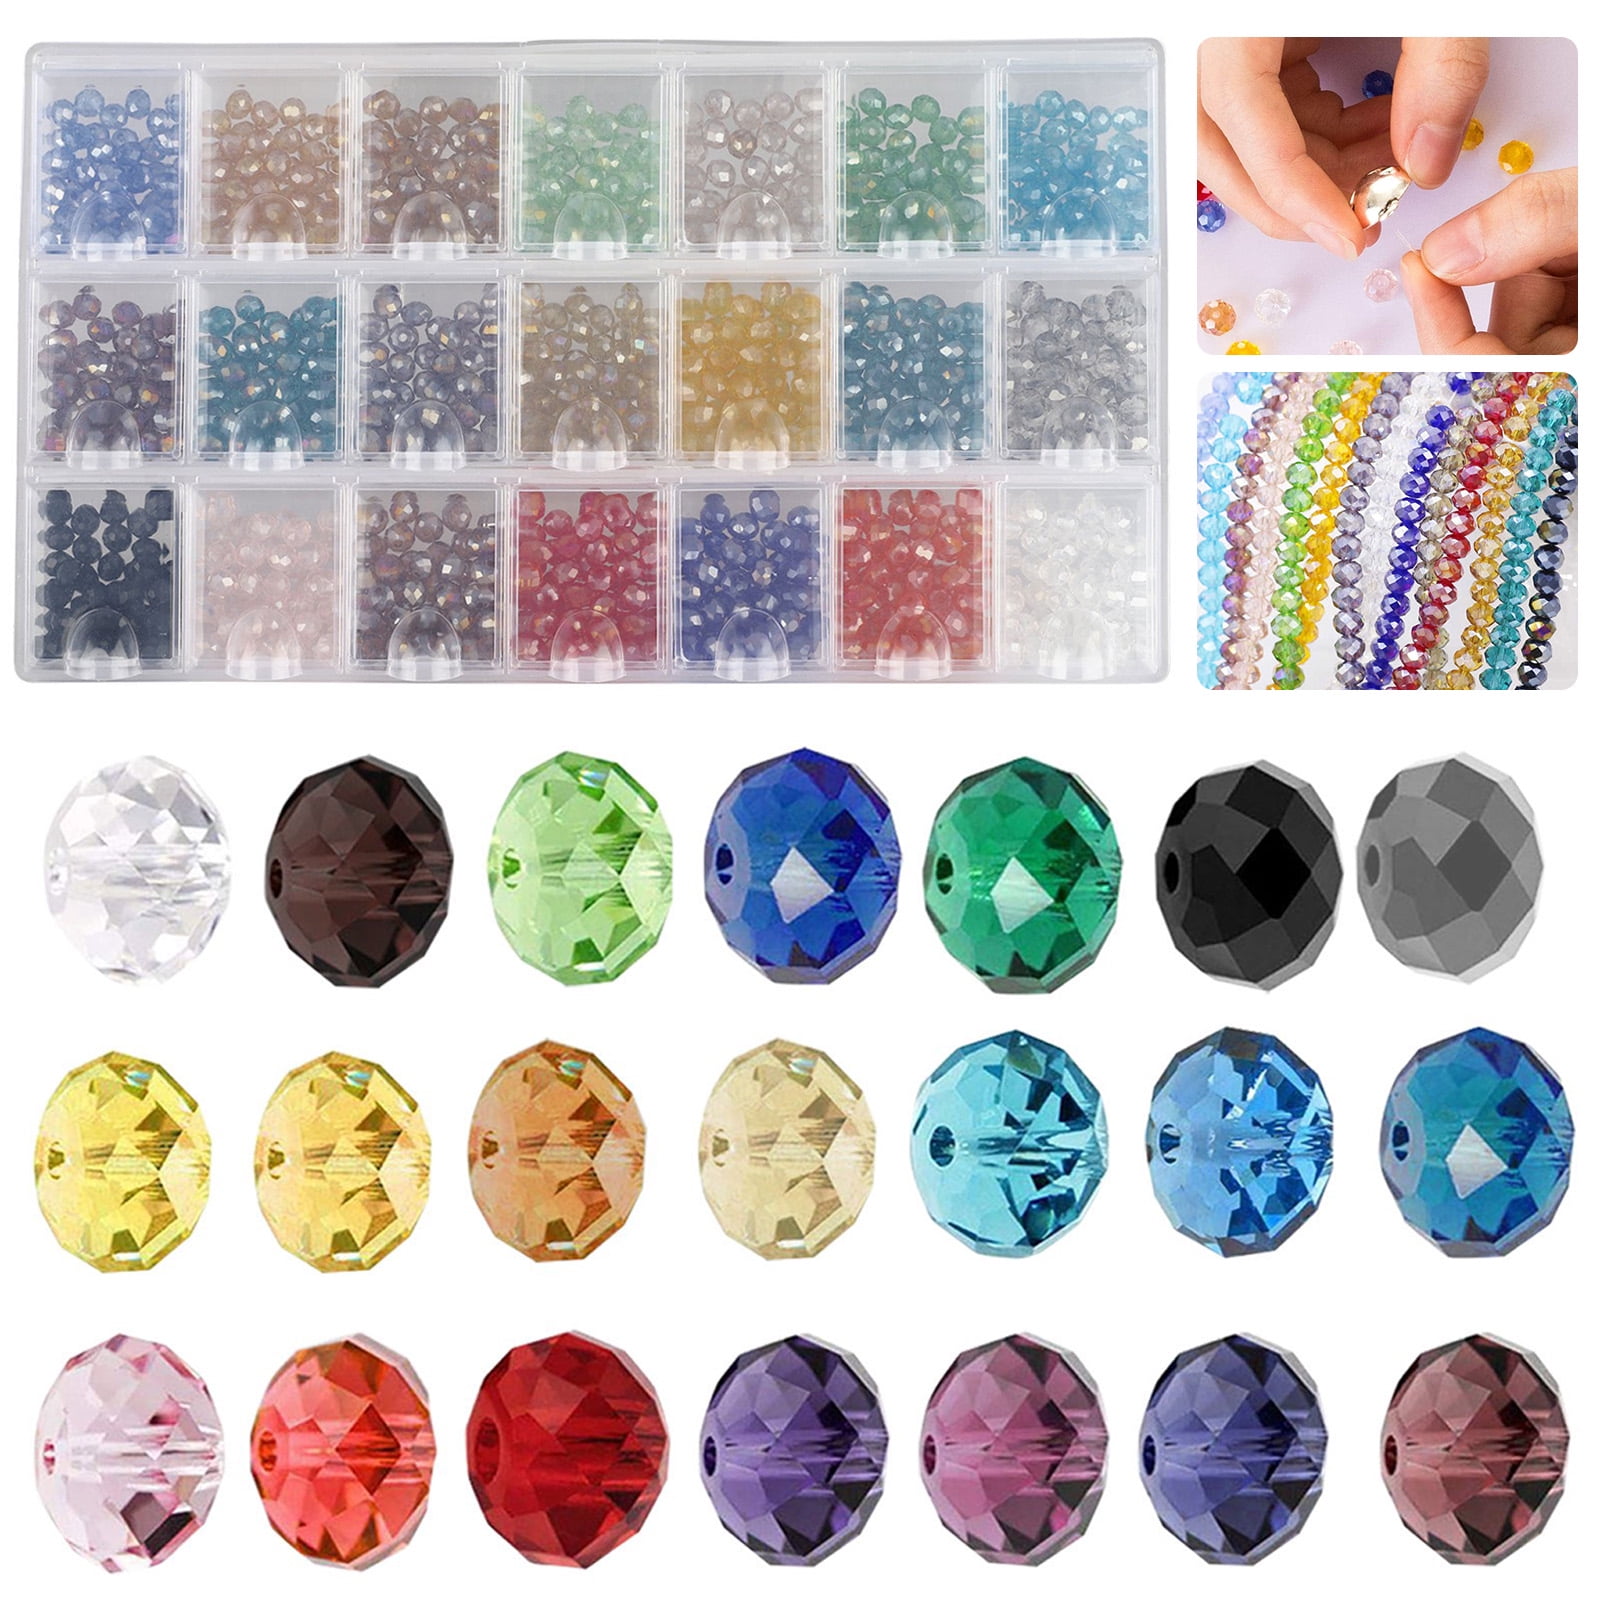 6x6x6mm 50pcs Cube Square Glass Crystal Rondelle Bead Spacer Loose Beads Finding 